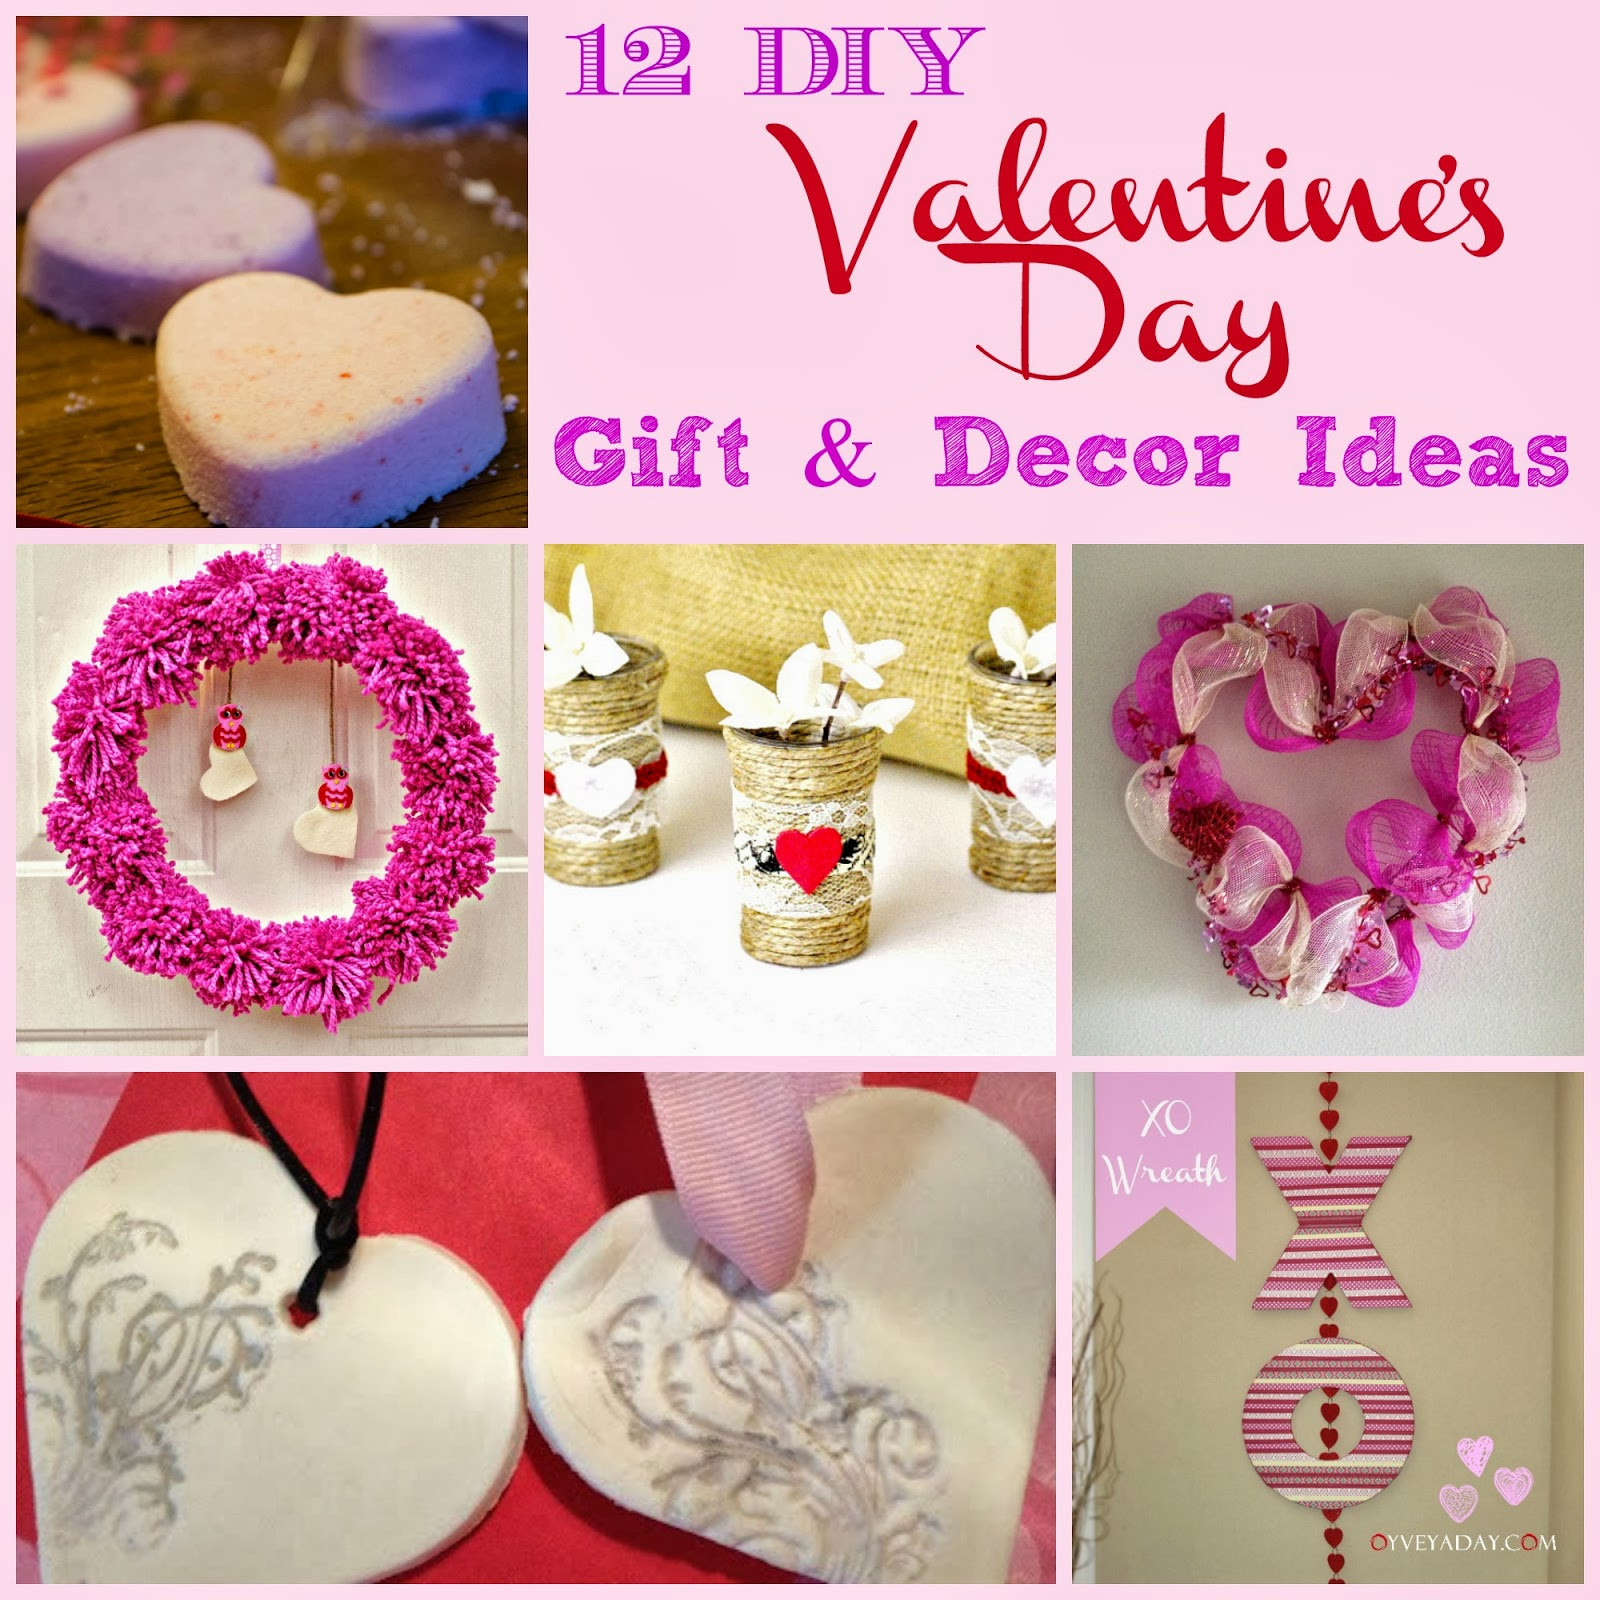 Simple Valentines Day Gift Ideas
 12 DIY Valentine s Day Gift & Decor Ideas Outnumbered 3 to 1